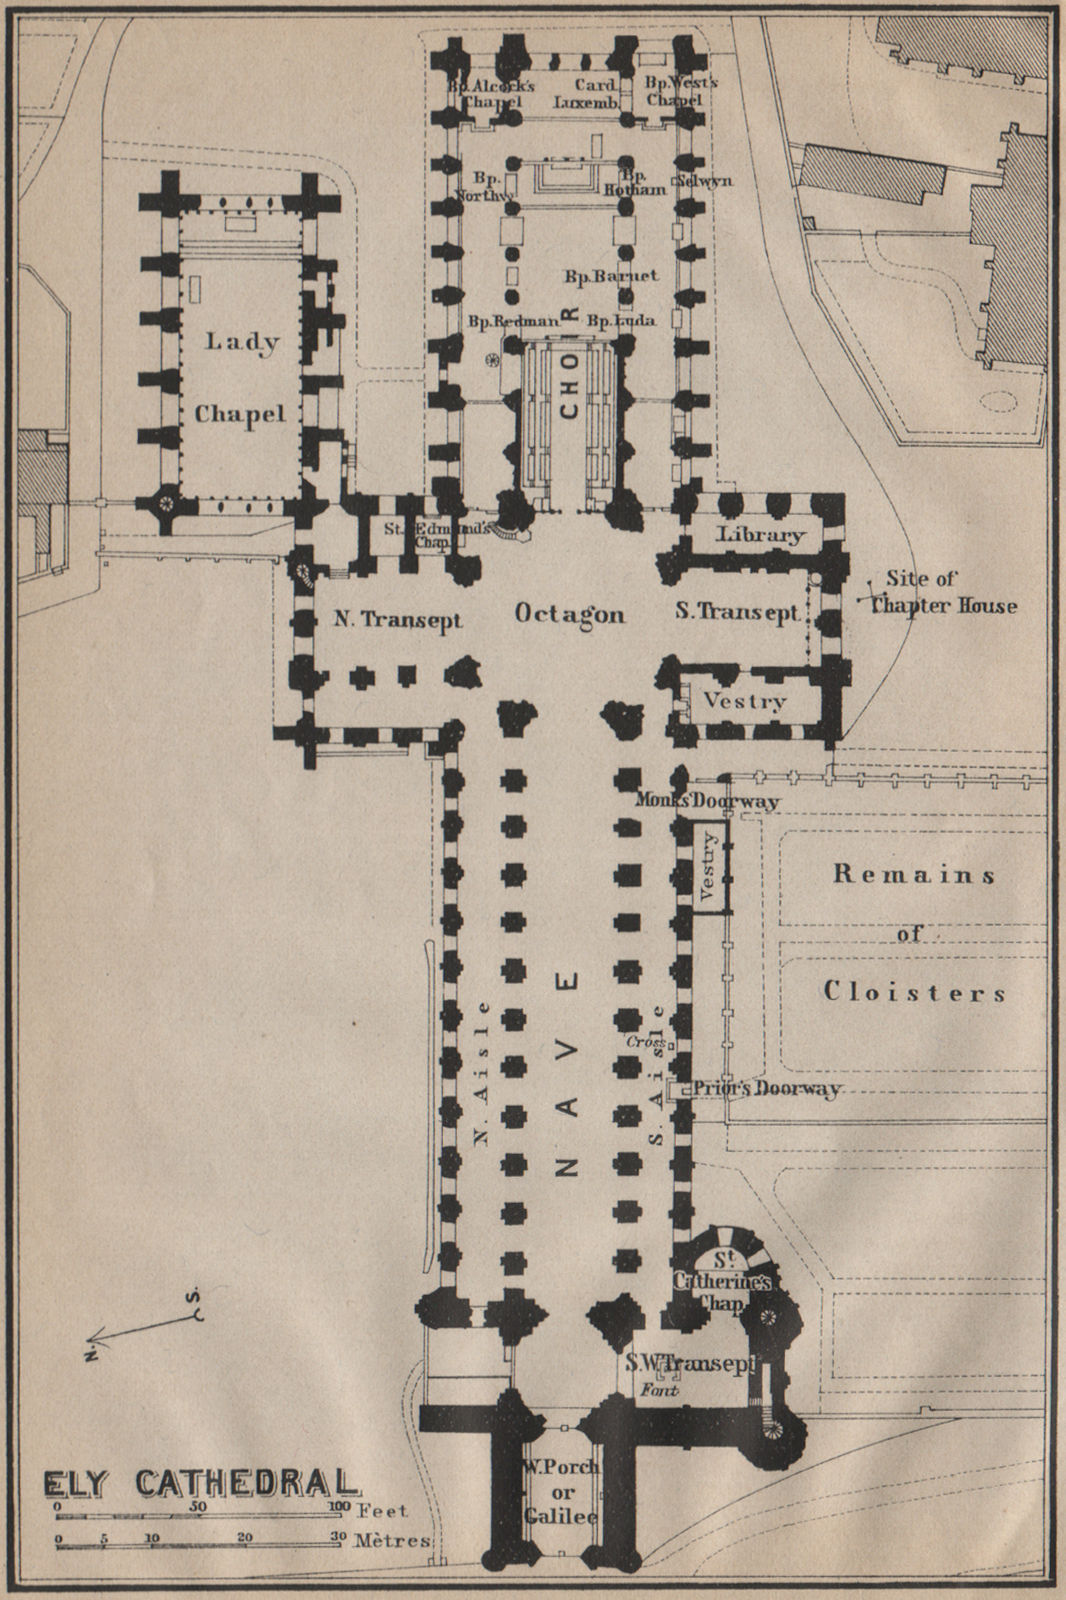 Associate Product ELY CATHEDRAL floor plan. Cambridgeshire. BAEDEKER 1910 old antique map chart